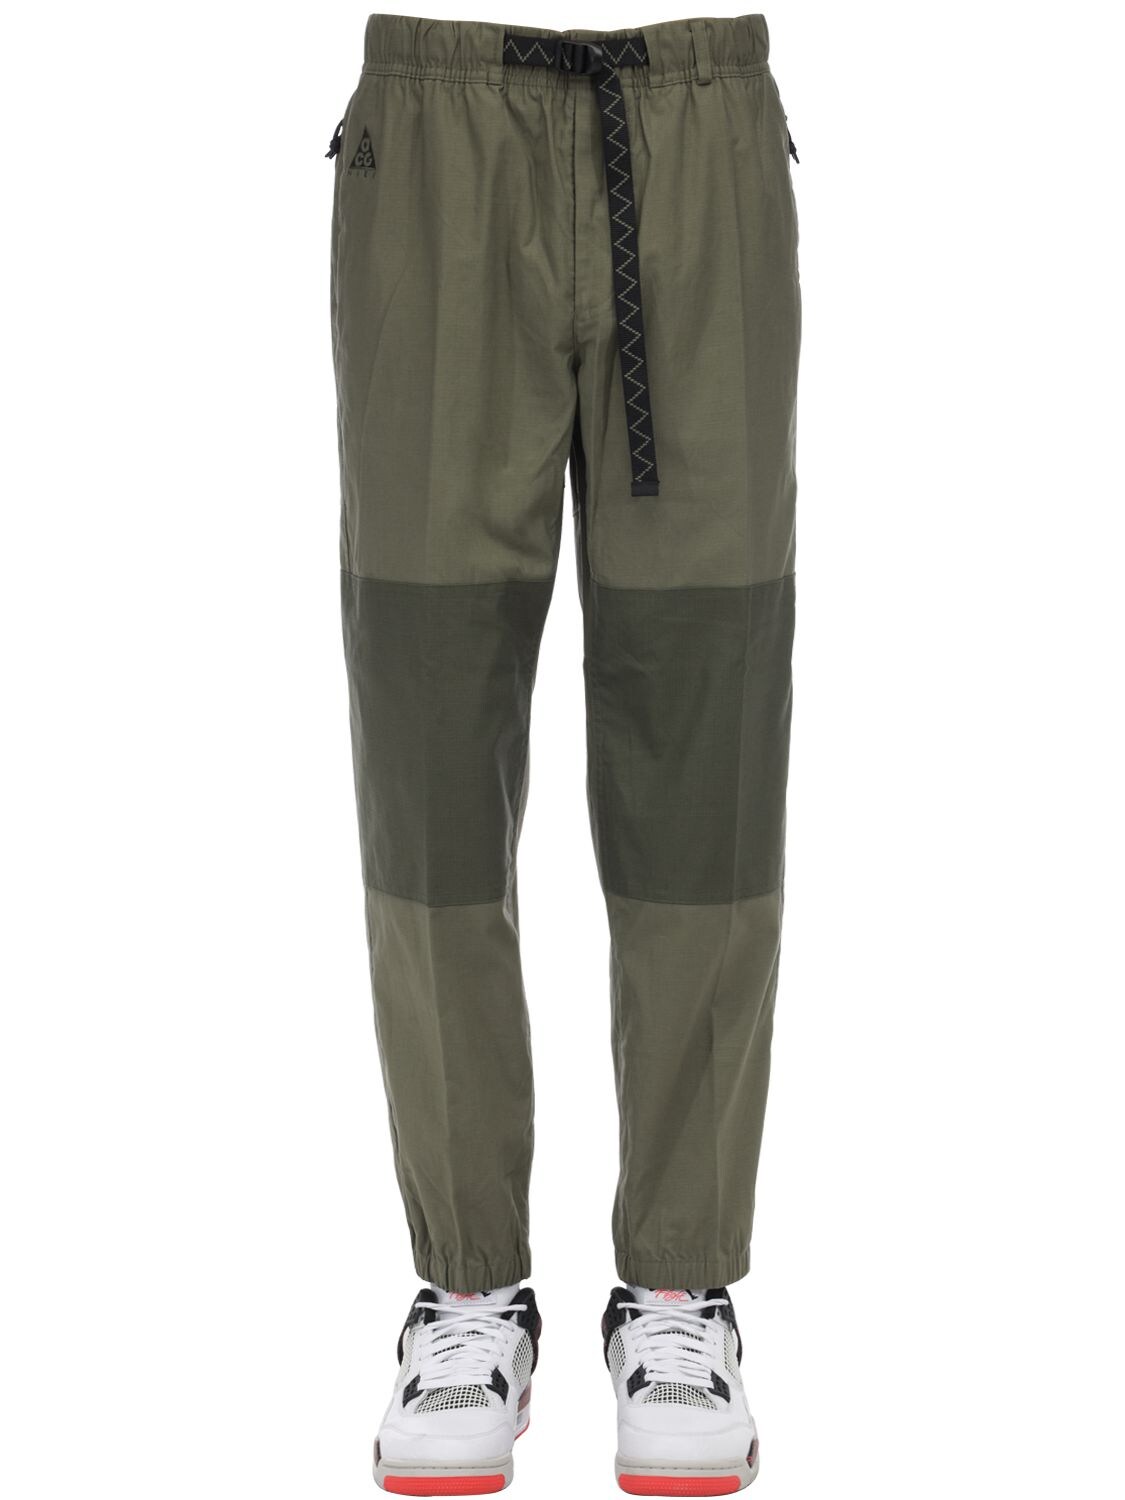 Nike Acg Ripstop Trail Trousers In Medium Olive